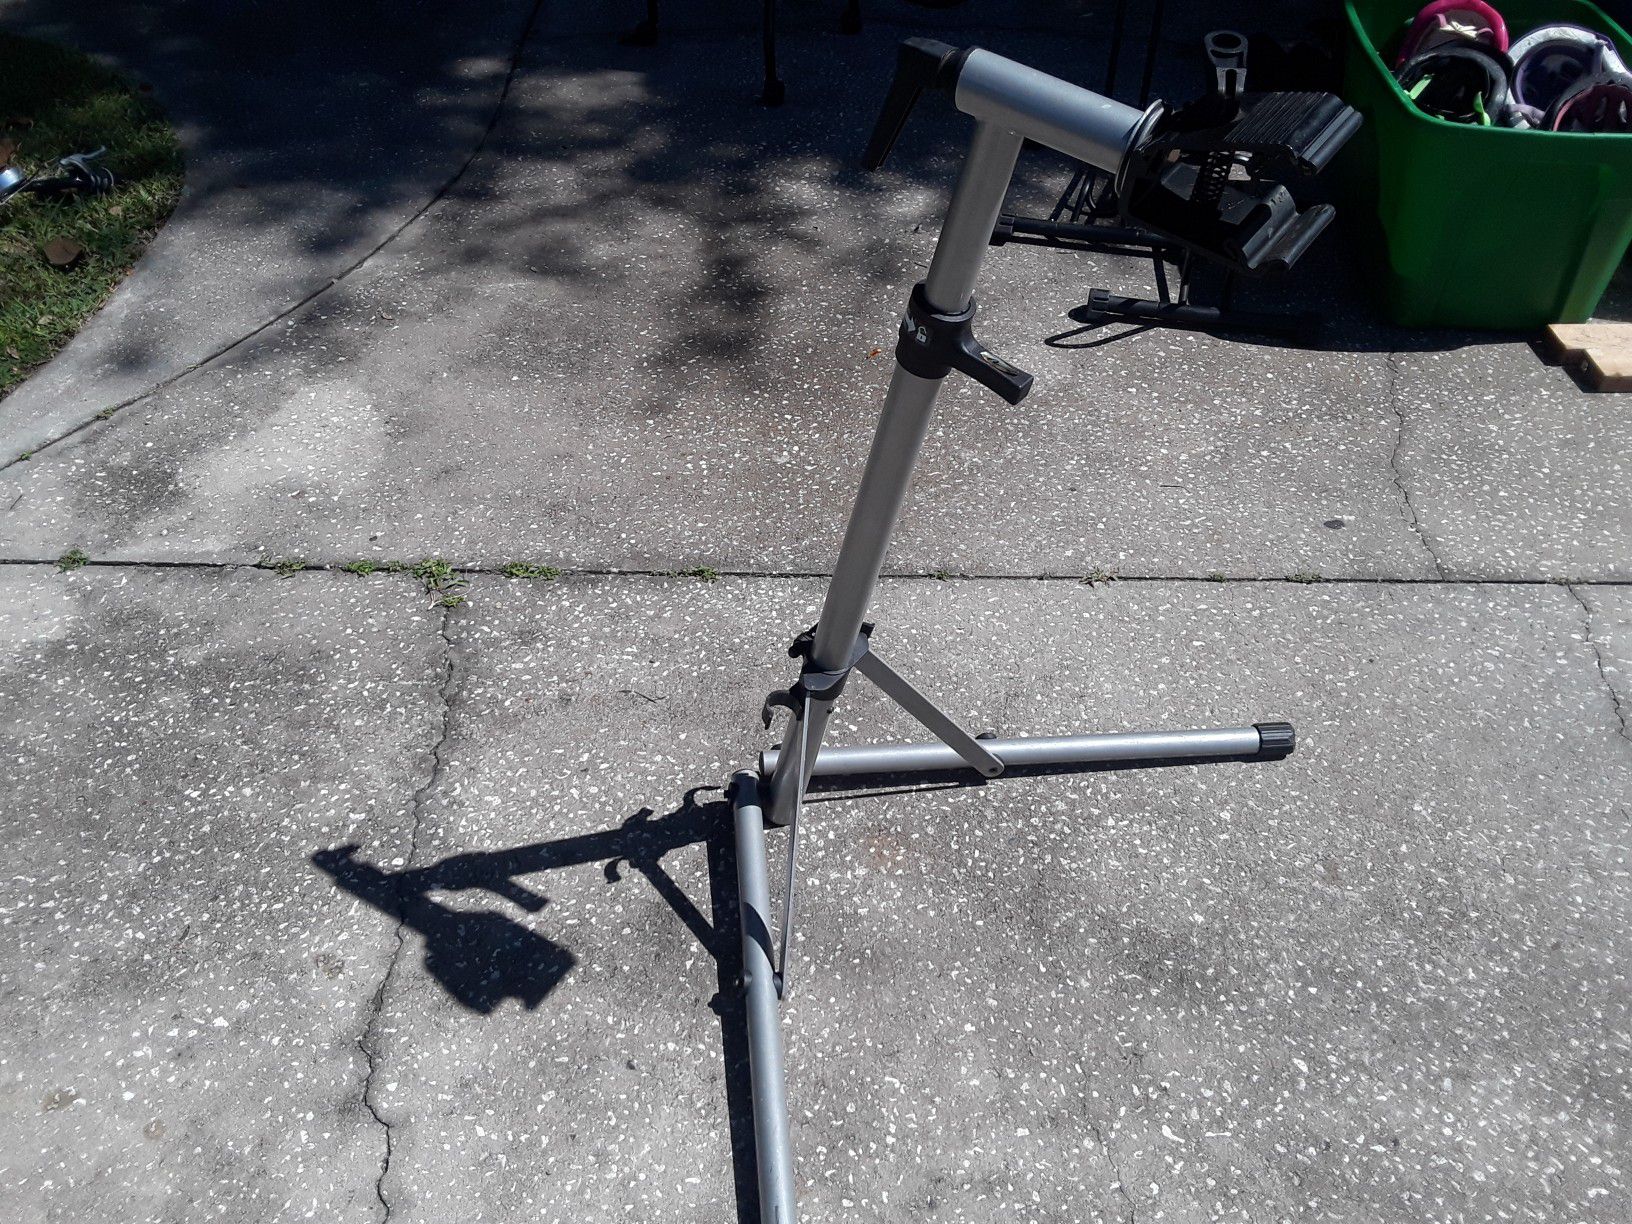 Specialized bike bicycle repair stand, like new.